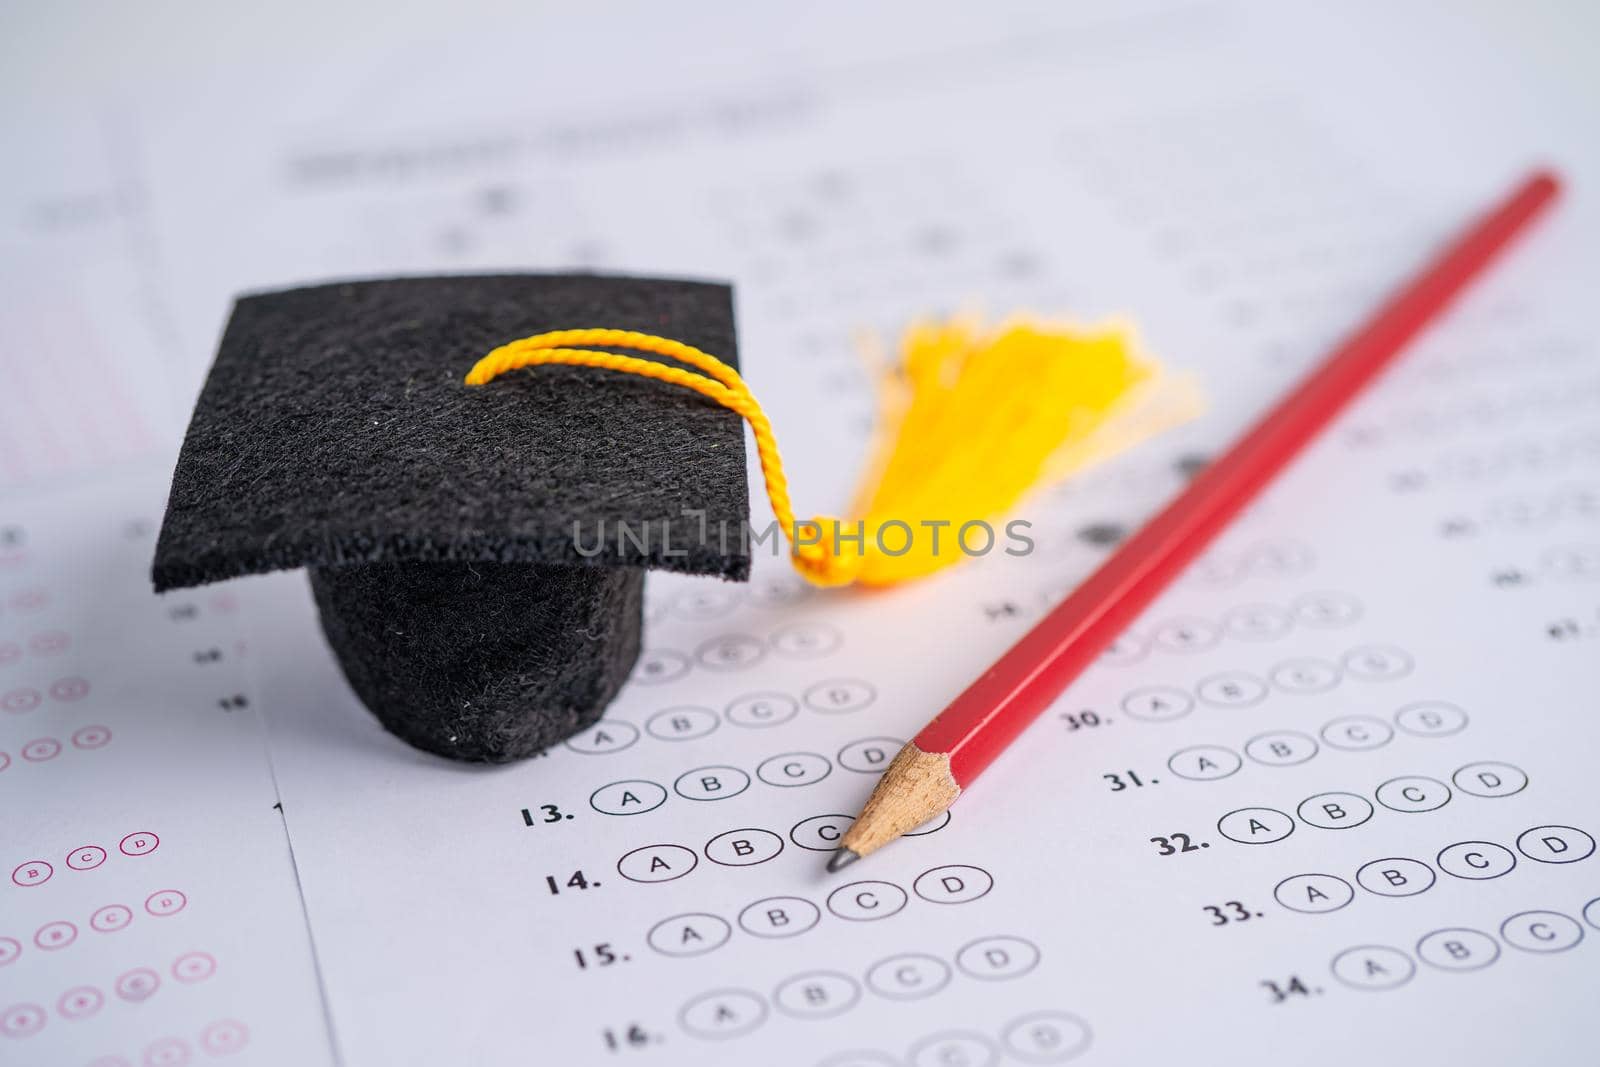 Graduation gap hat and pencil on answer sheet background, Education study testing learning teach concept.